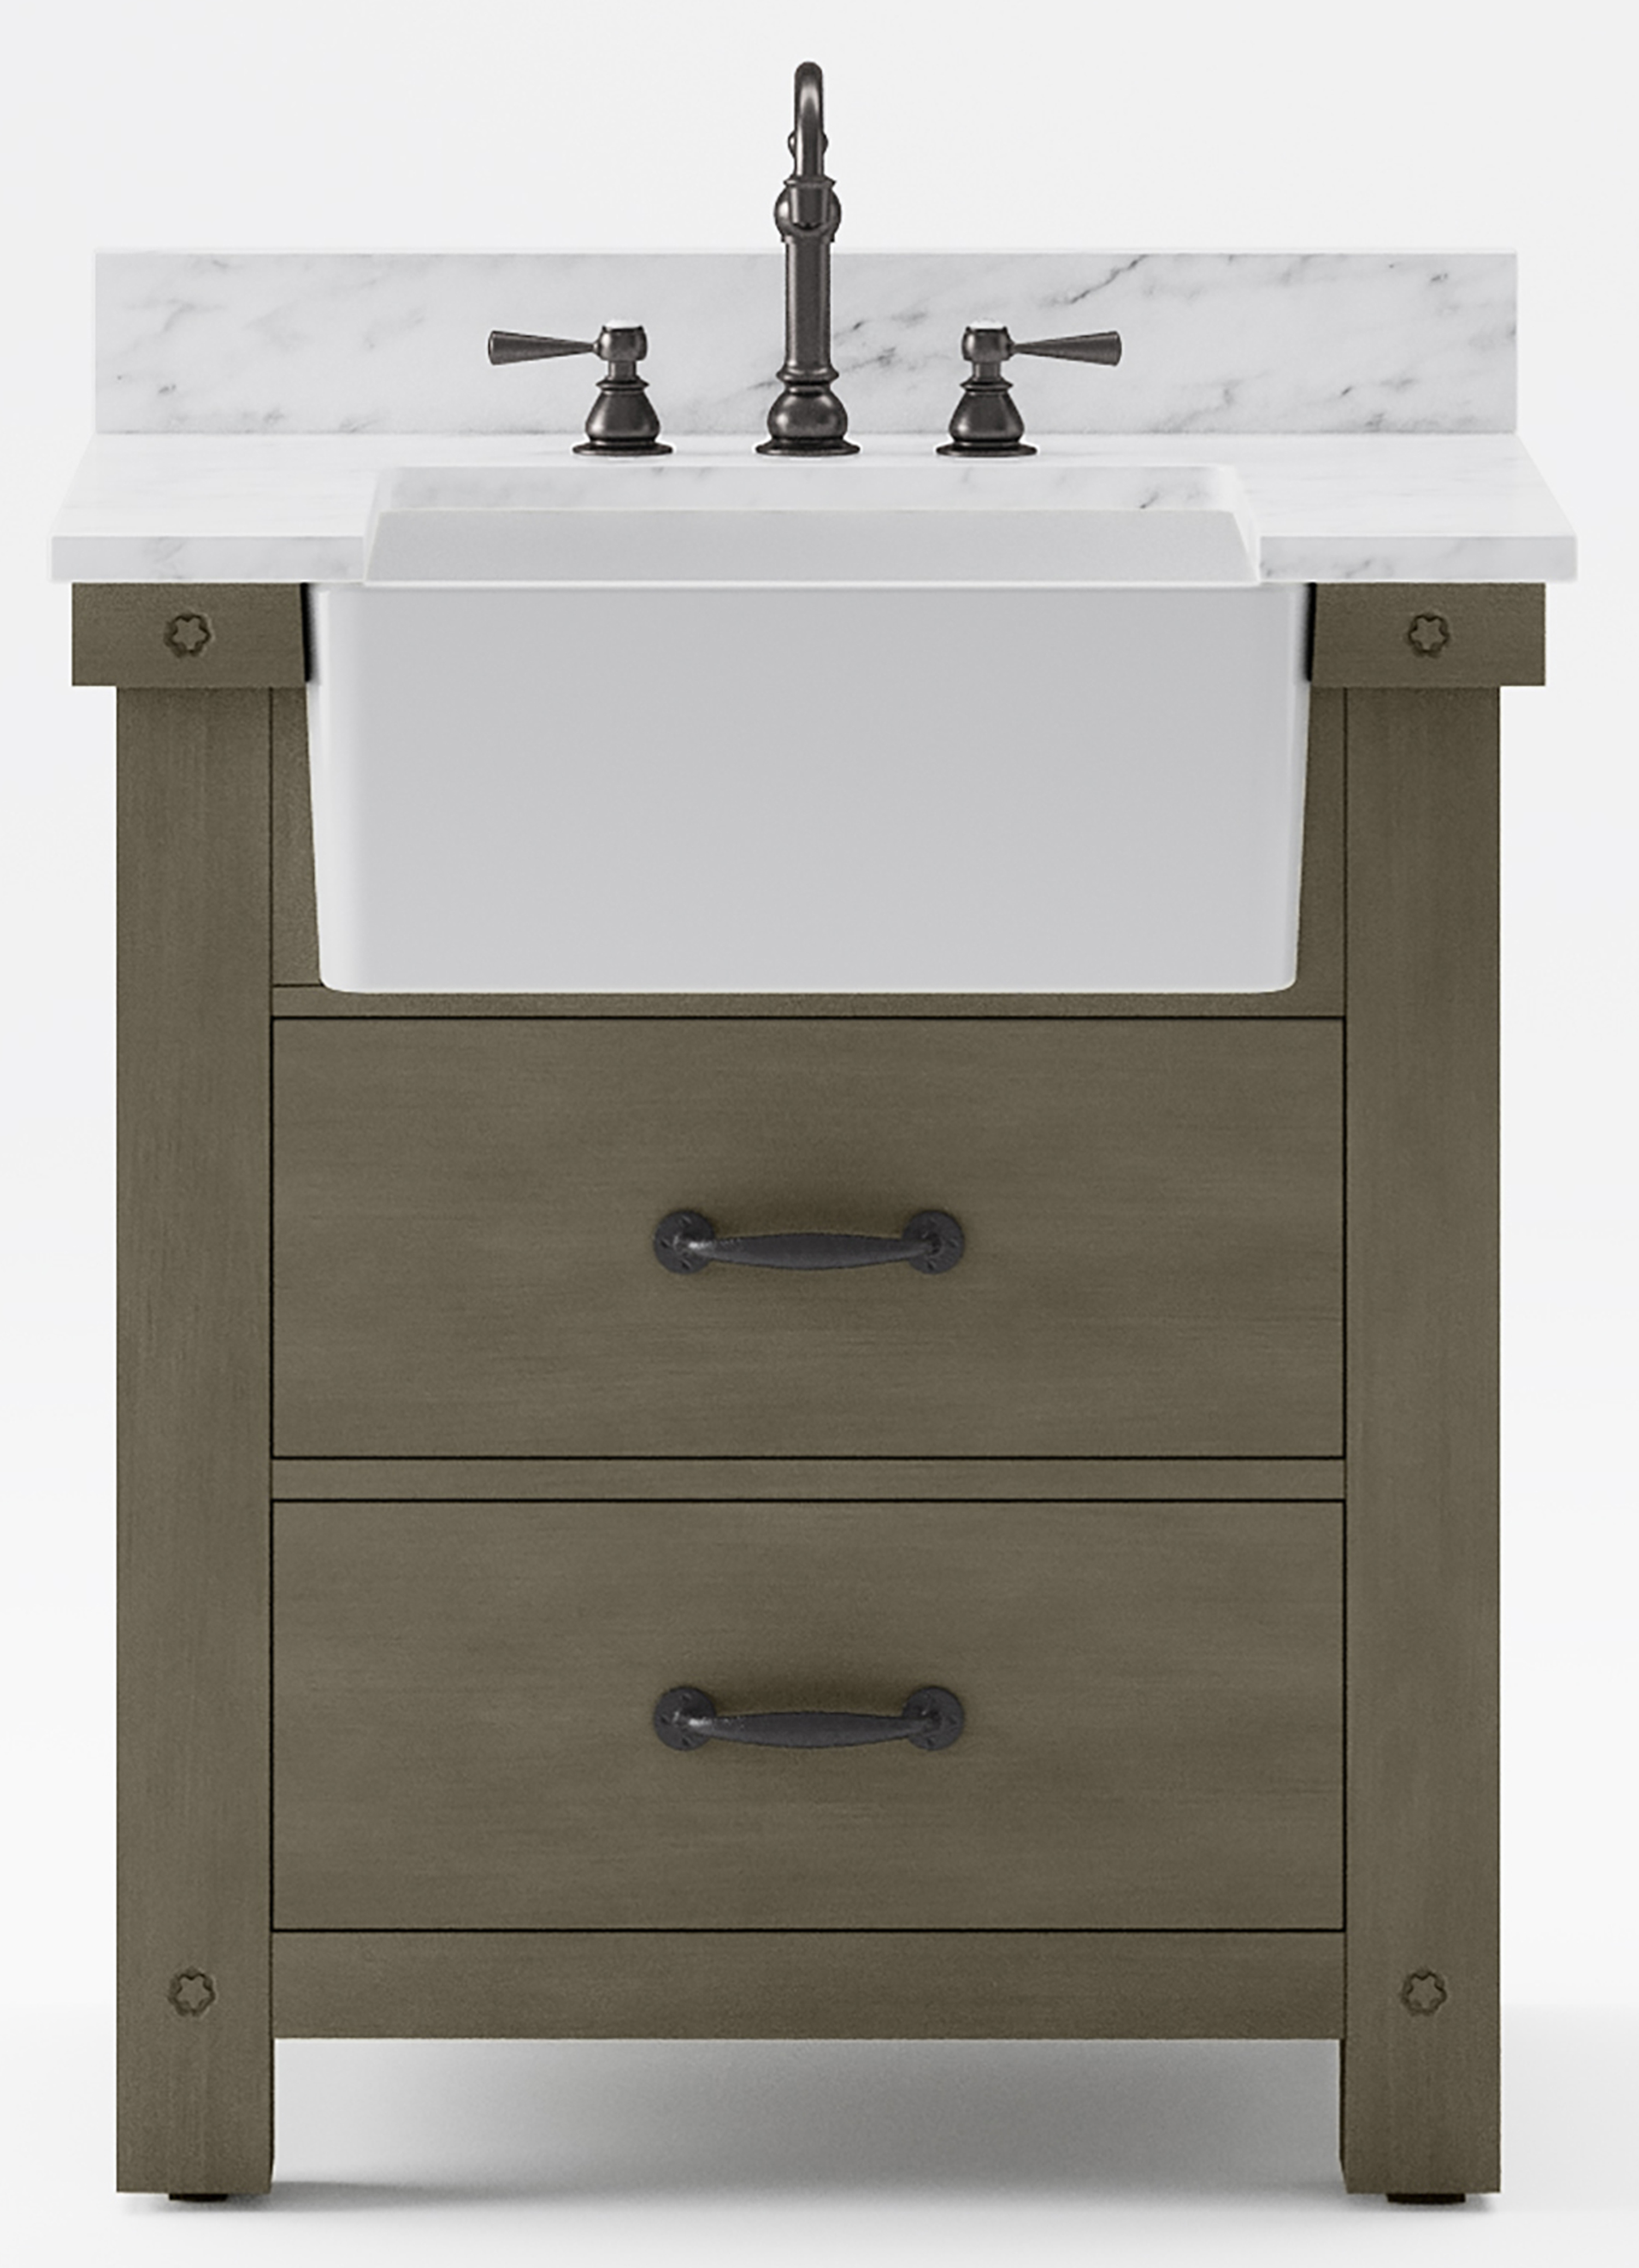 30" Single Sink Carrara White Marble Countertop Vanity in Grizzle Gray with Mirror and Faucet Options